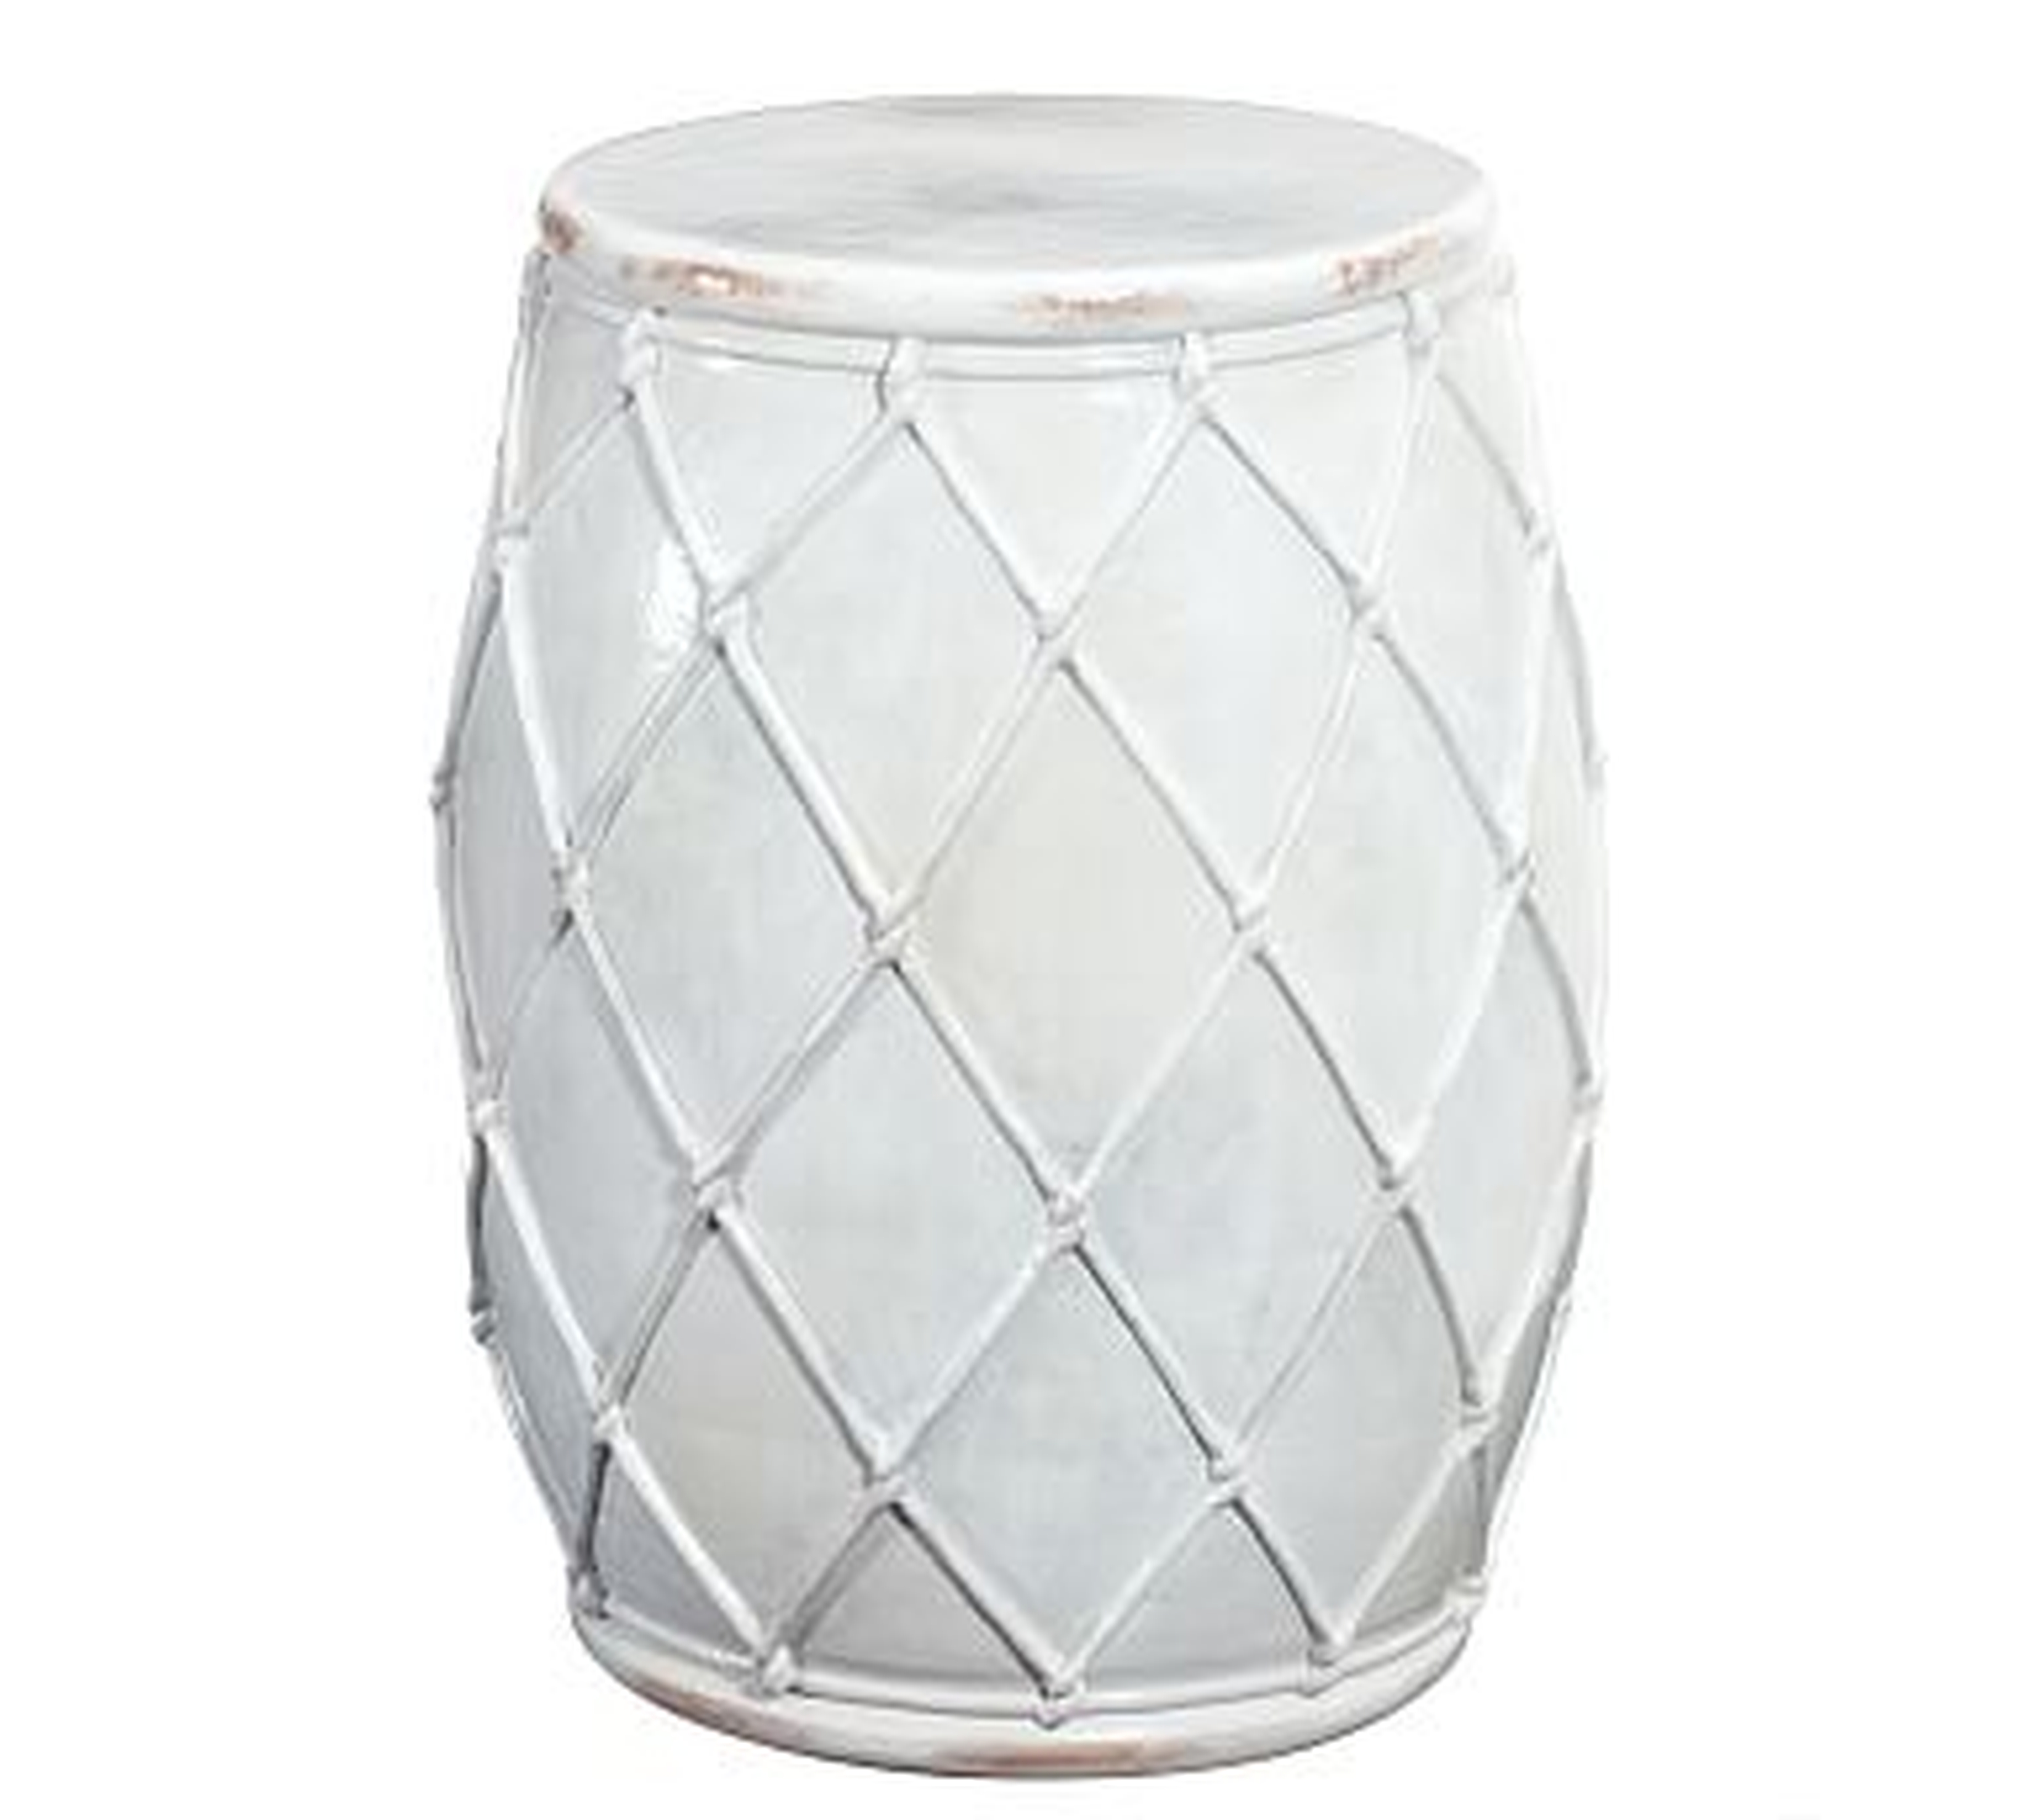 Net Ceramic Accent Table, Ivory - Pottery Barn